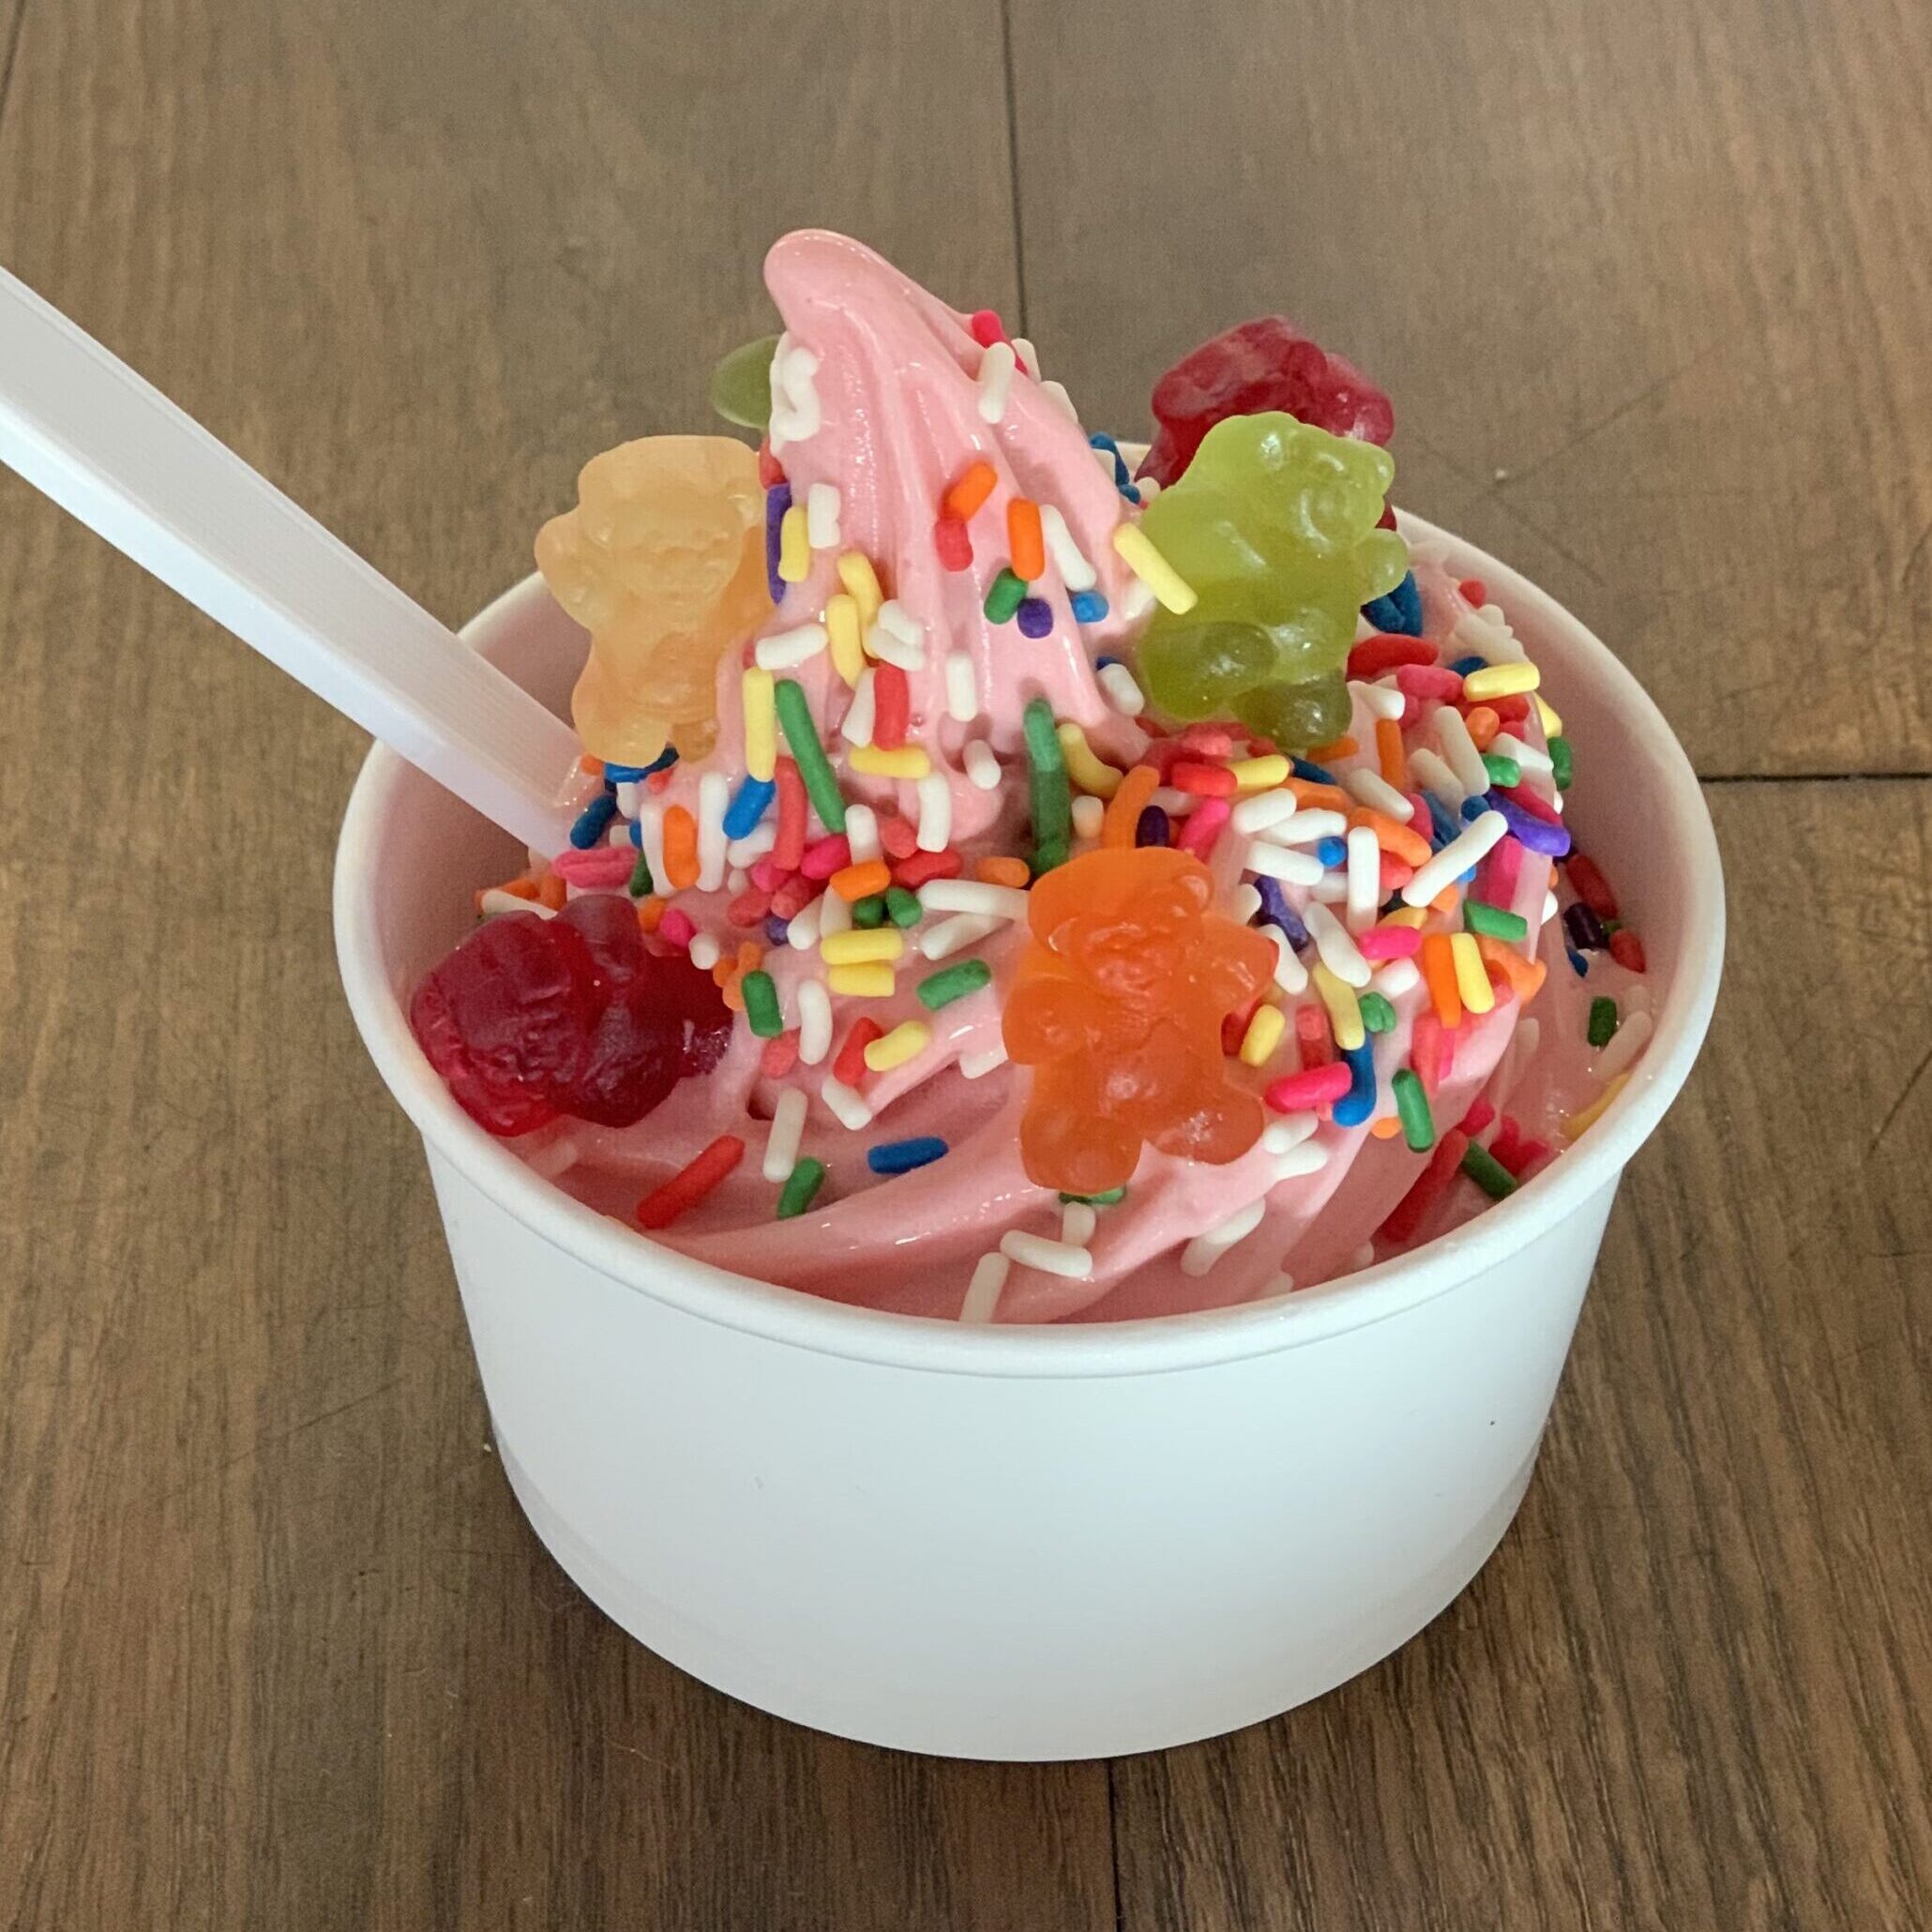 The current size for the regular-sized frozen yogurt.